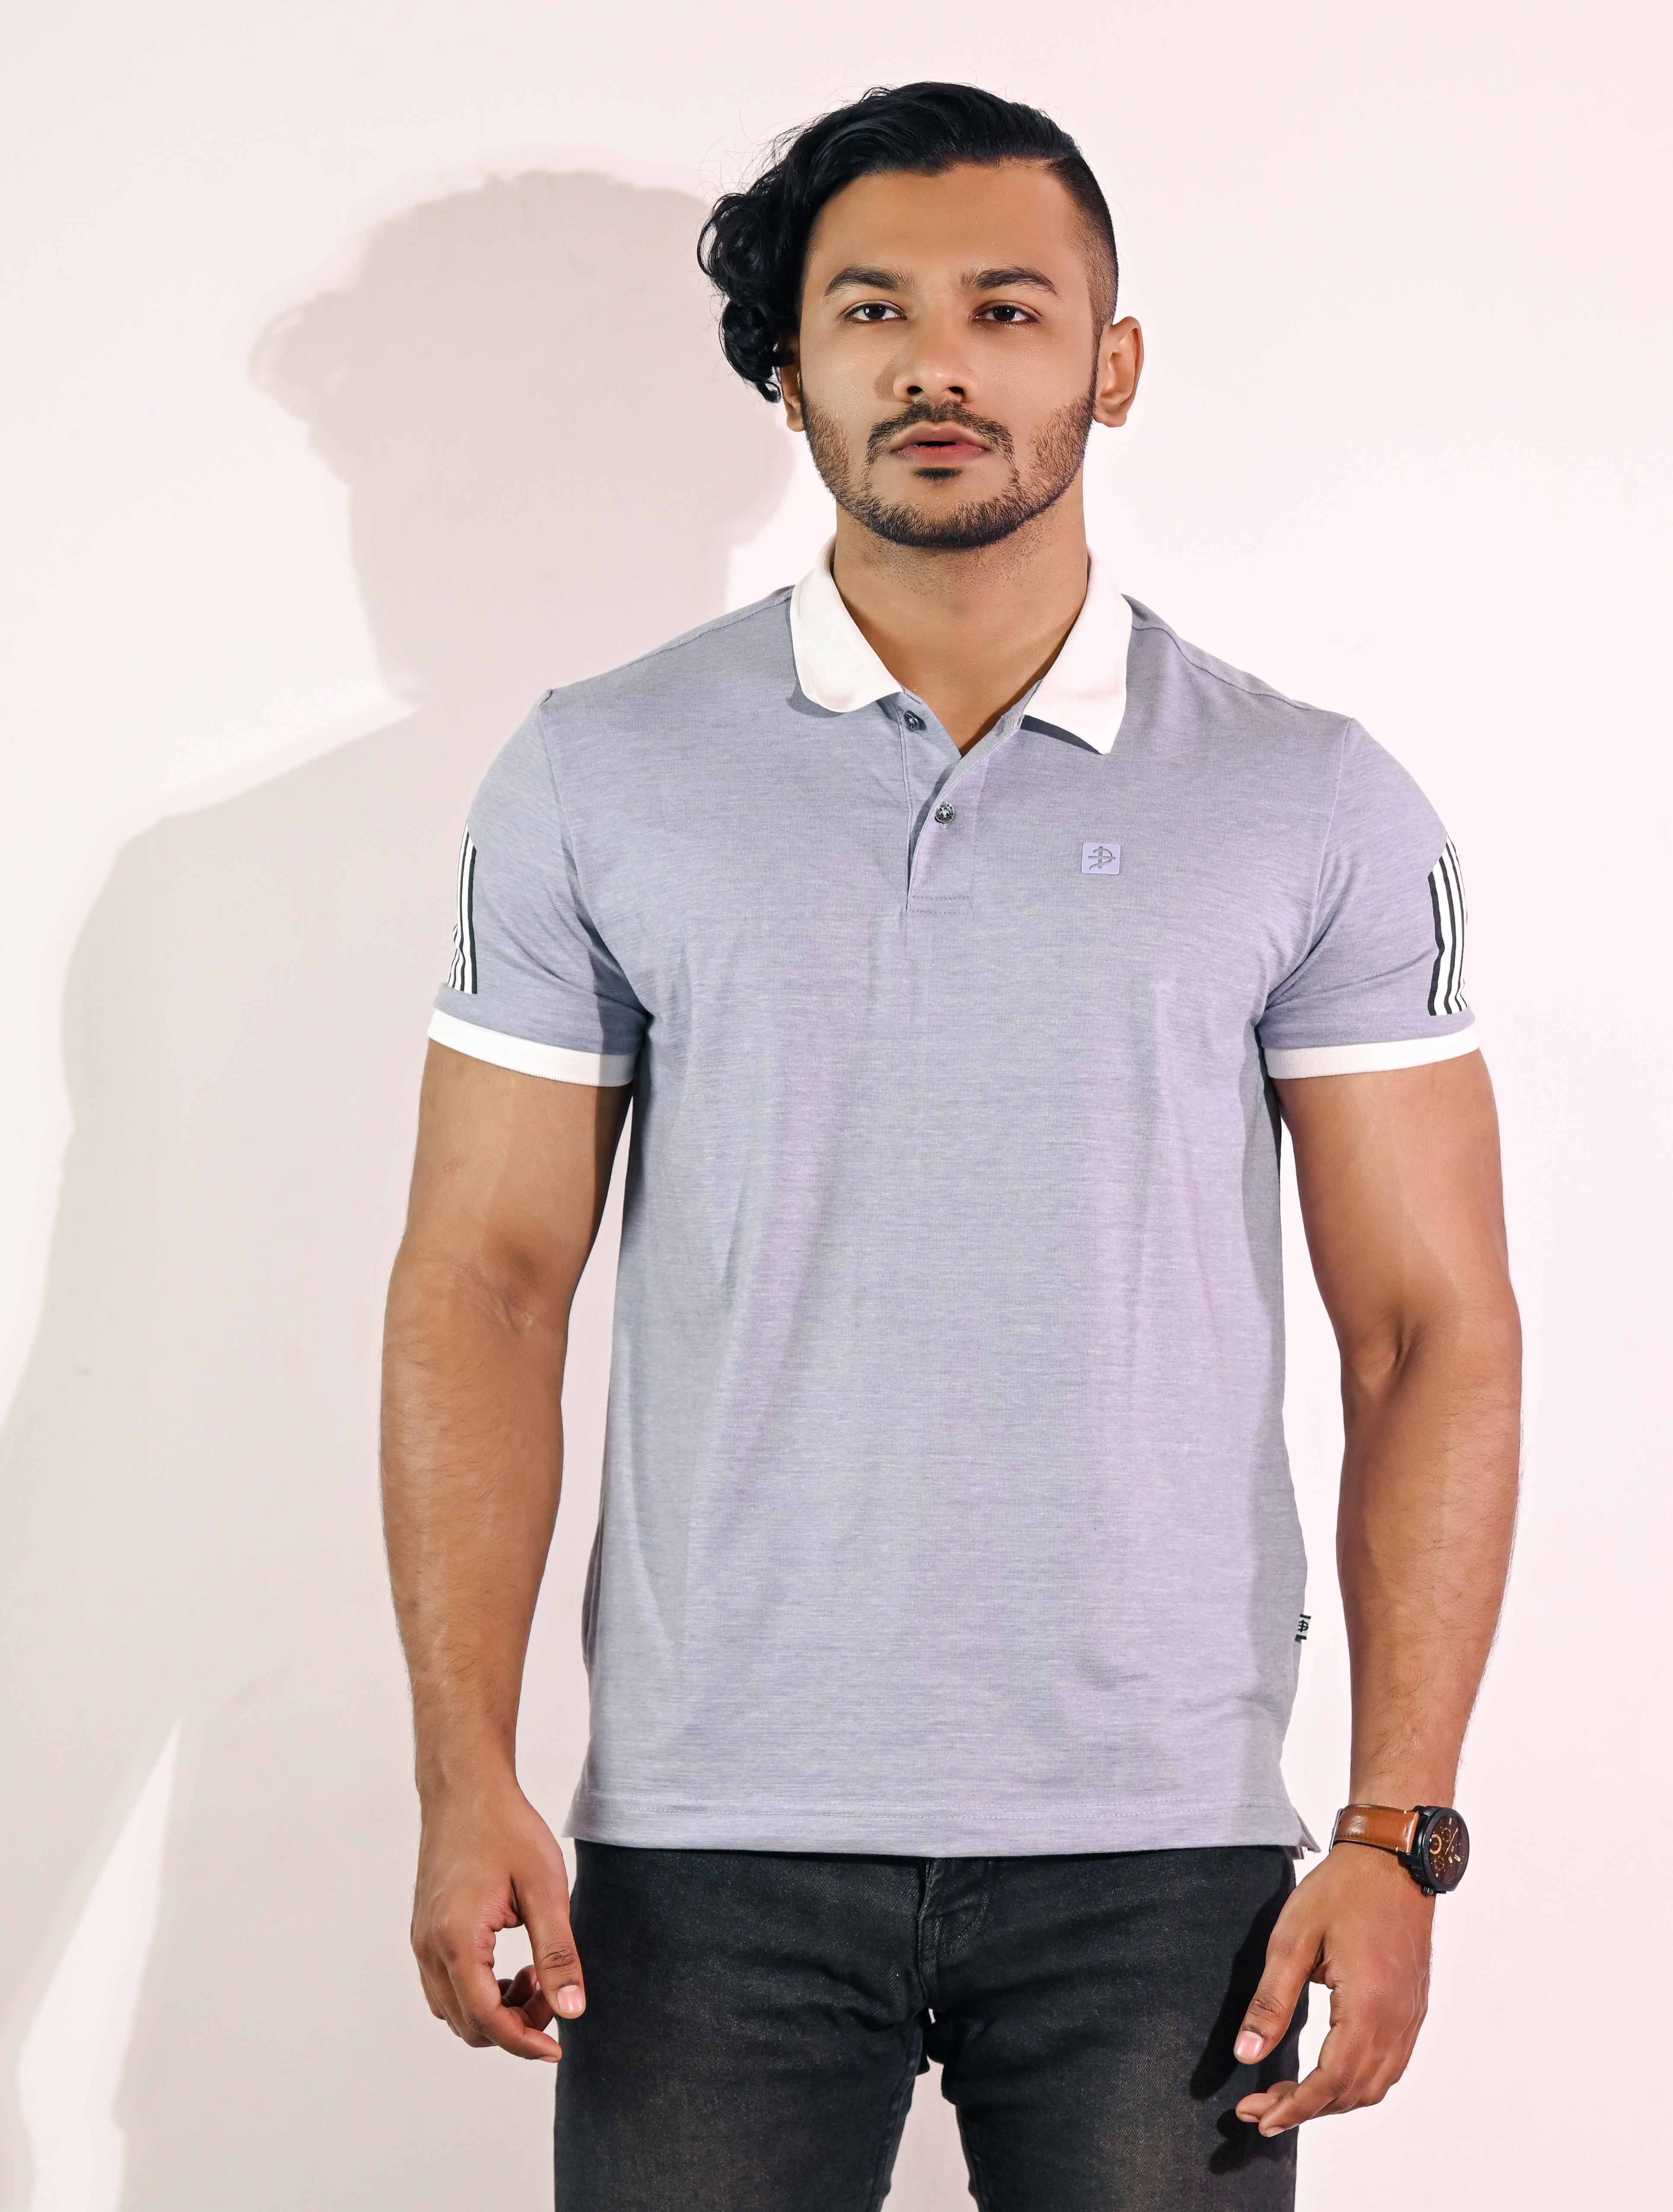 Comfortable and soft cotton Polo Shirts for men